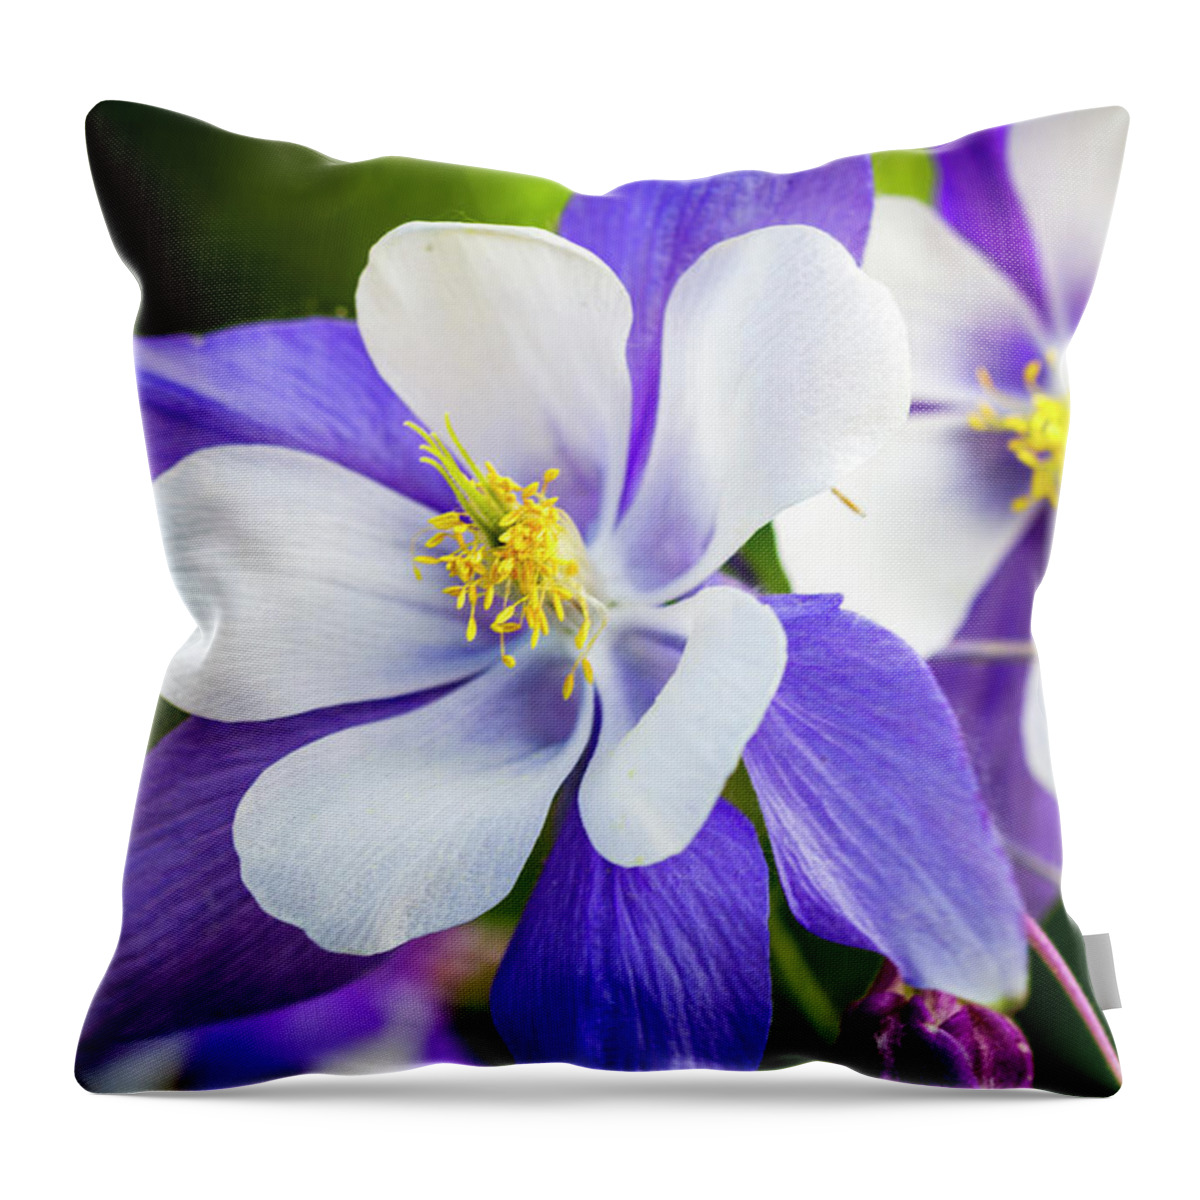 Colorado Throw Pillow featuring the photograph Columbines Inside by Teri Virbickis